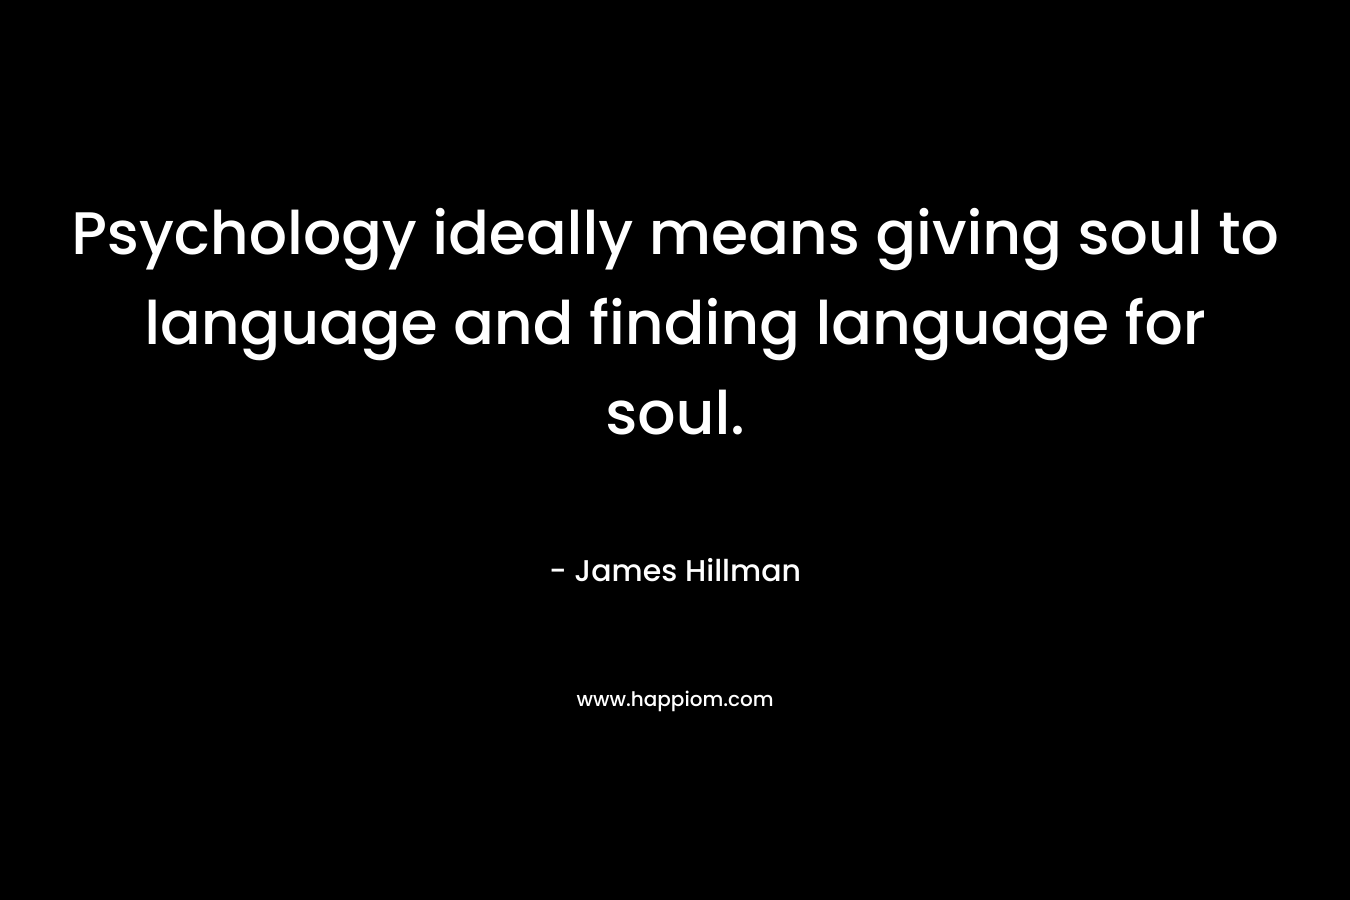 Psychology ideally means giving soul to language and finding language for soul.